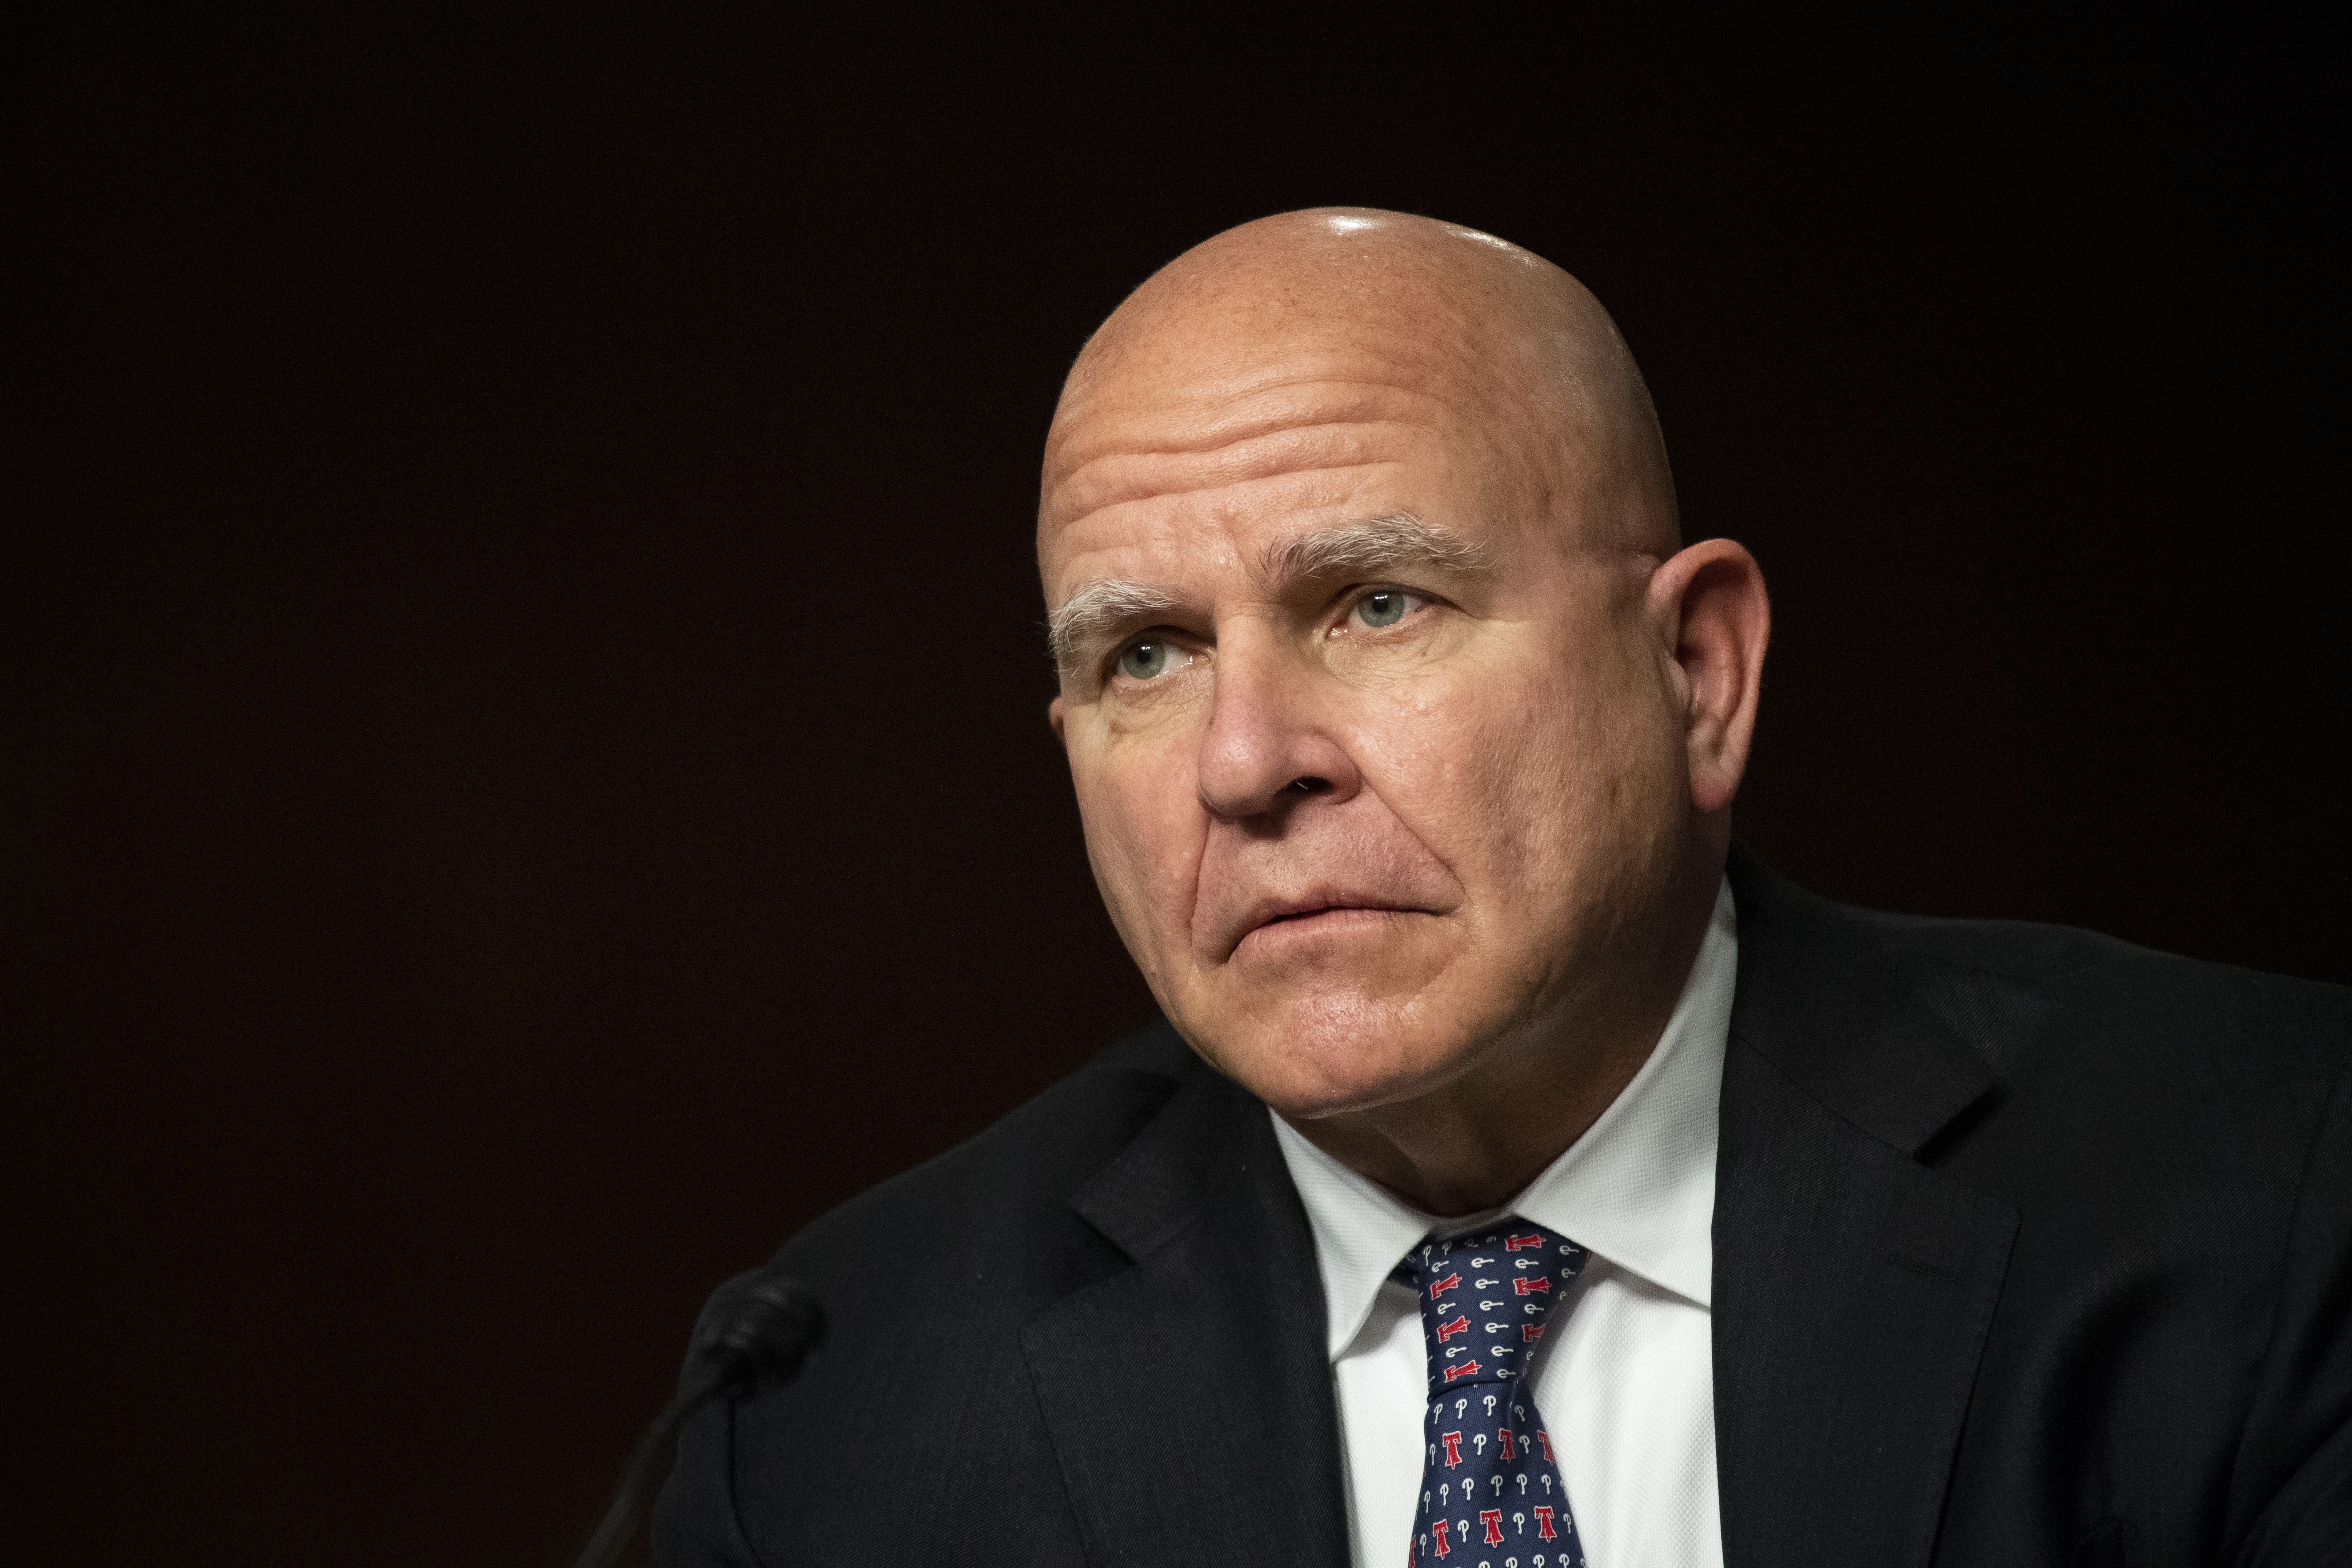 ormer National Security Advisor Herbert Raymond McMaster attends the Senate Armed Services Committee hearing on Global Security Challenges and Strategy in Washington on Tuesday, March 2, 2021.